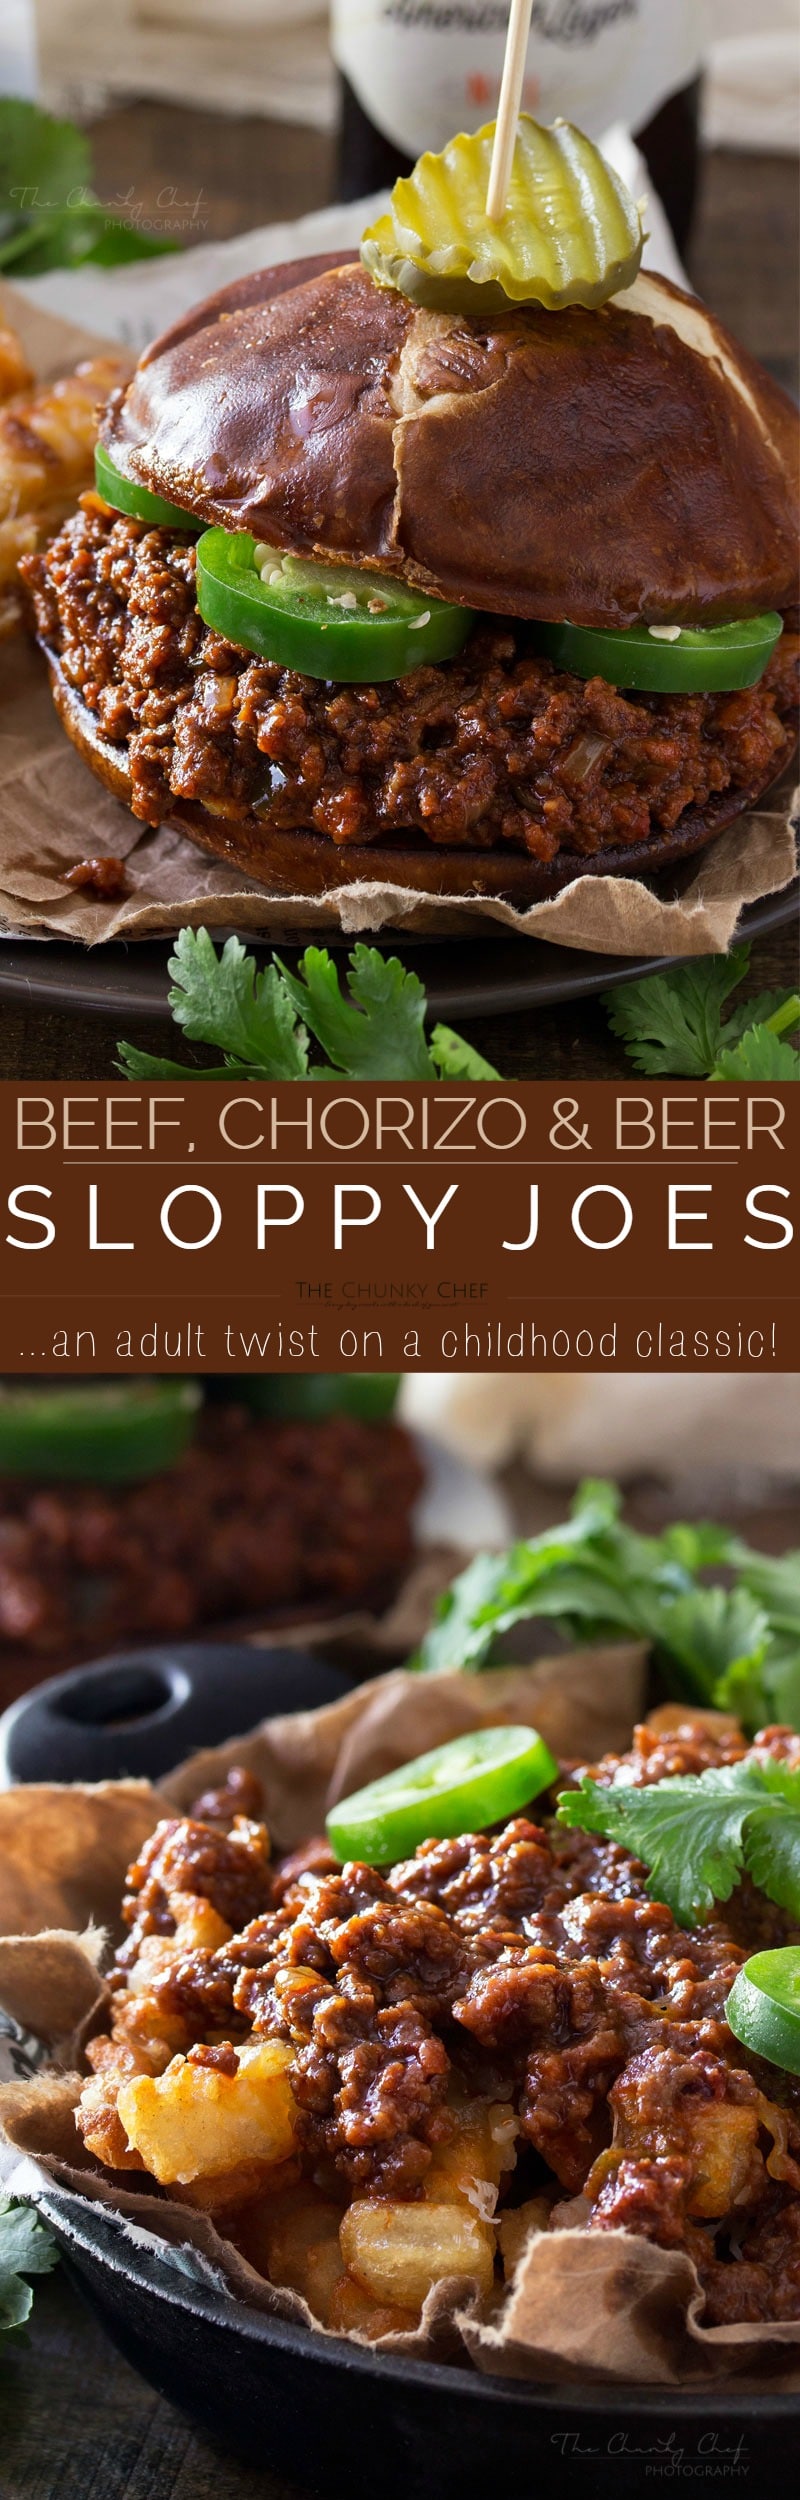 Beef Beer and Chorizo Sloppy Joes | These aren't the usual sloppy joes... made with beef, spicy chorizo, jalapeno and beer, they're an adult version of everyone's favorite childhood sandwich! | http://thechunkychef.com